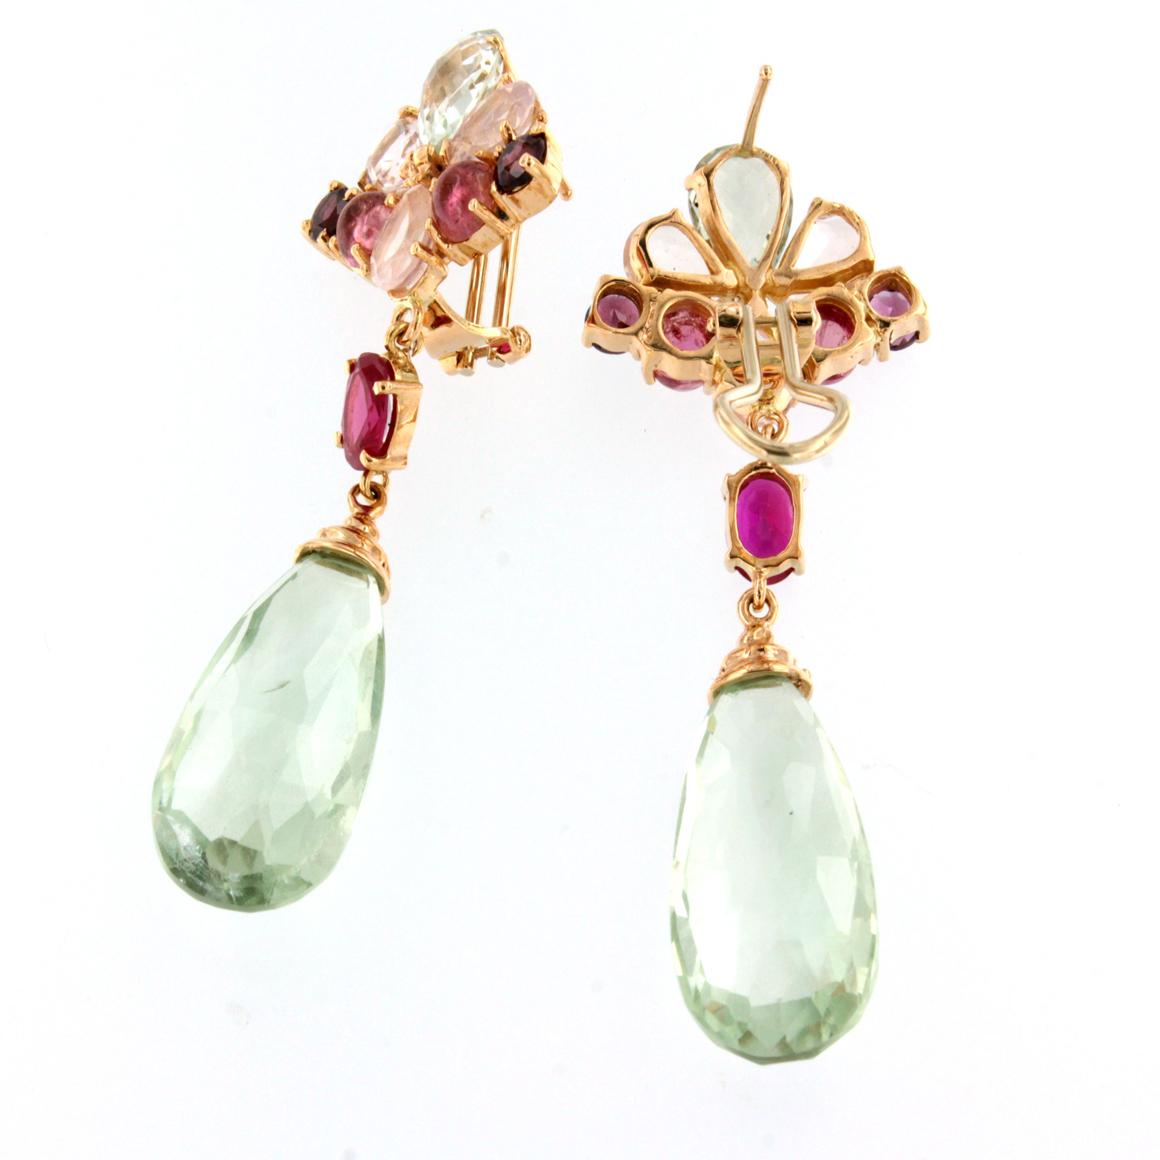 Mixed Cut 18Kt Rose Gold with Prasiolite Pink Quartz and Pink Tourmaline Earrings